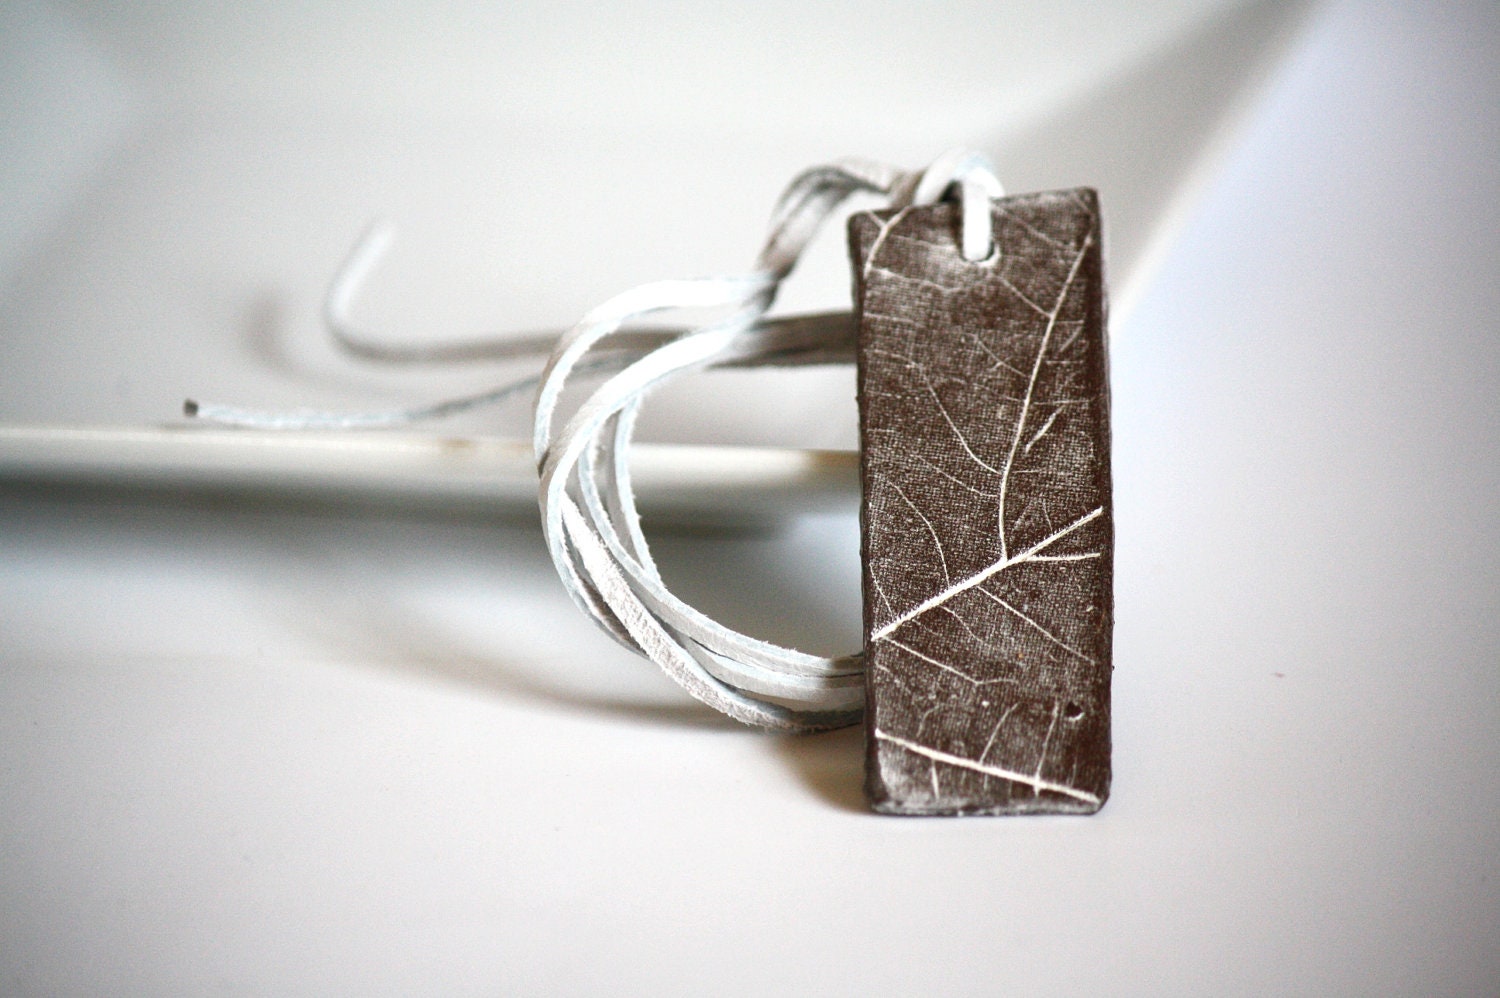 II Chocolate brown snow white, leaf veins hand pressed ceramic clay pendant necklace, organic, natural, ooak - CatHot